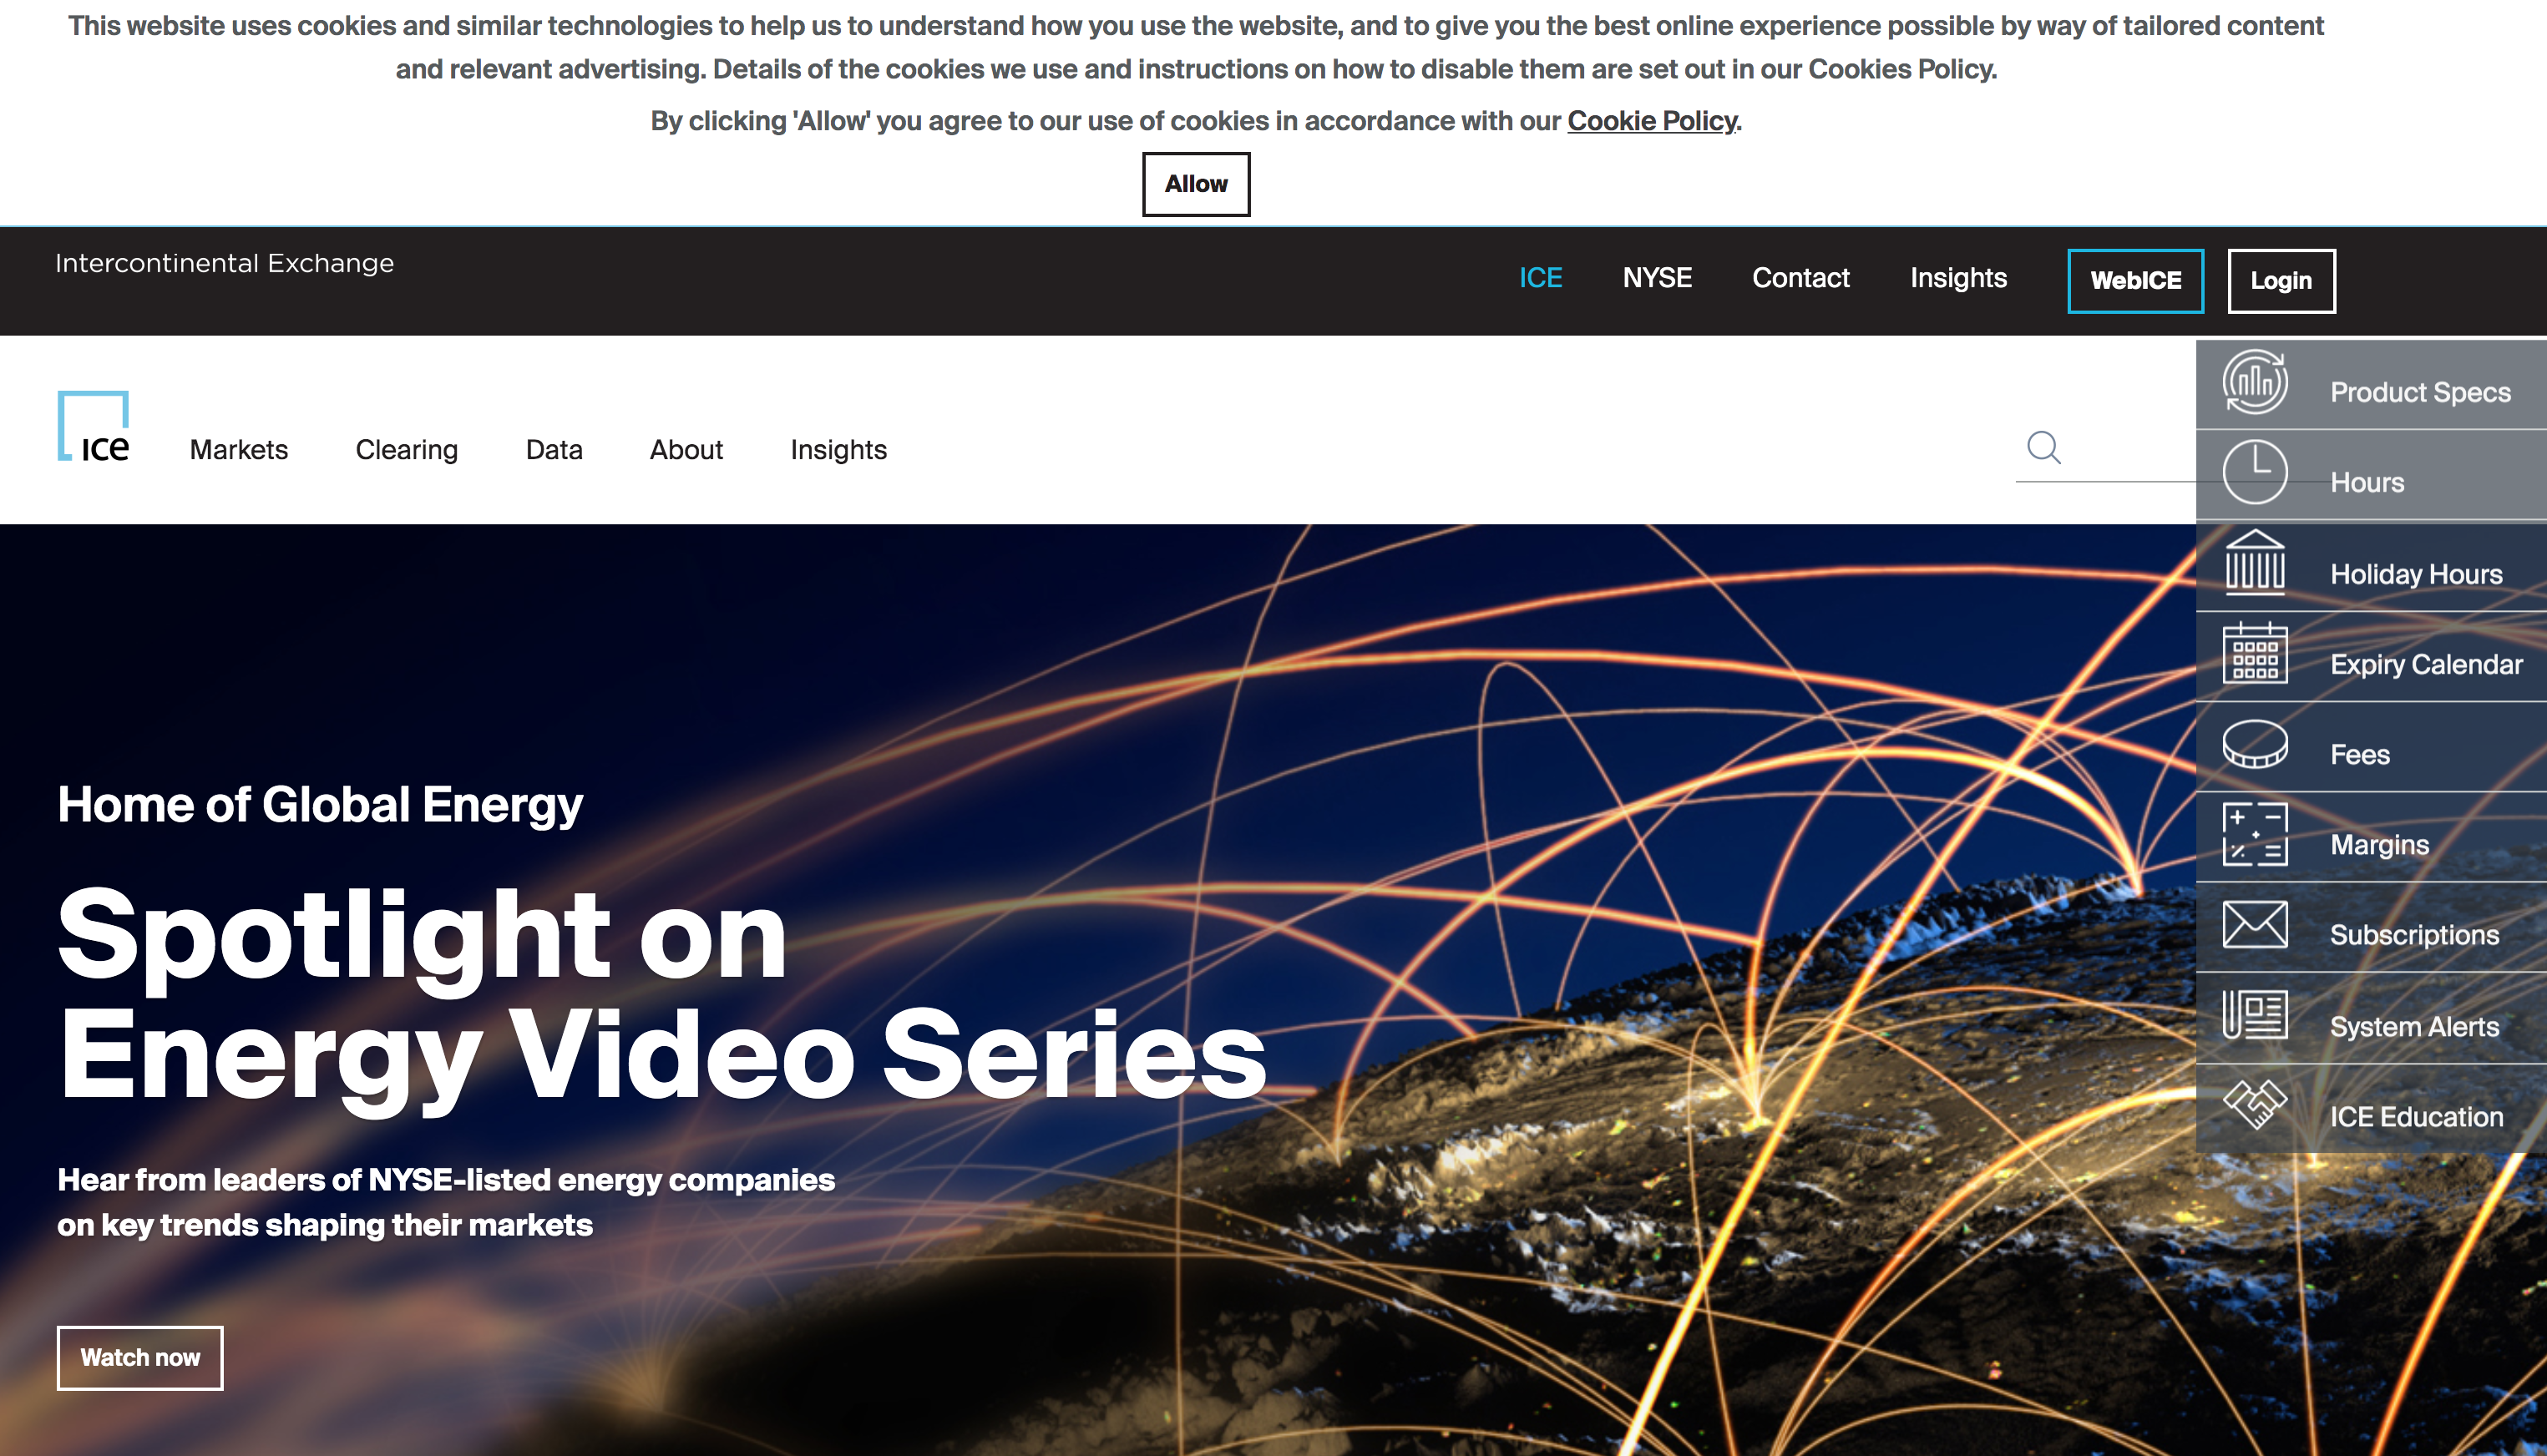 Intercontinental Exchange's redirect to their corporate home page